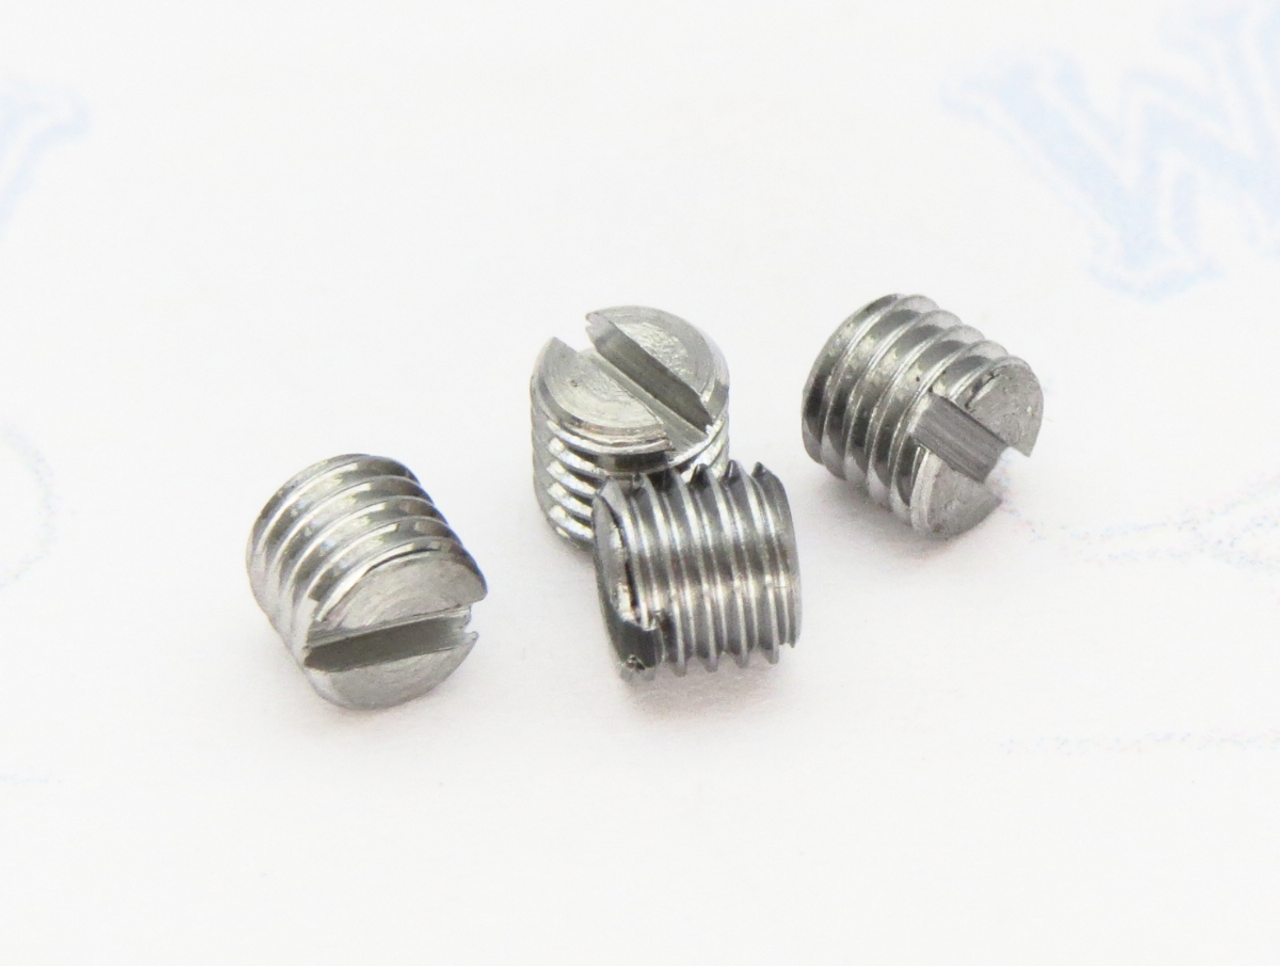 Ruger Stainless Scope Base Filler Screws for 10/22 and Charger